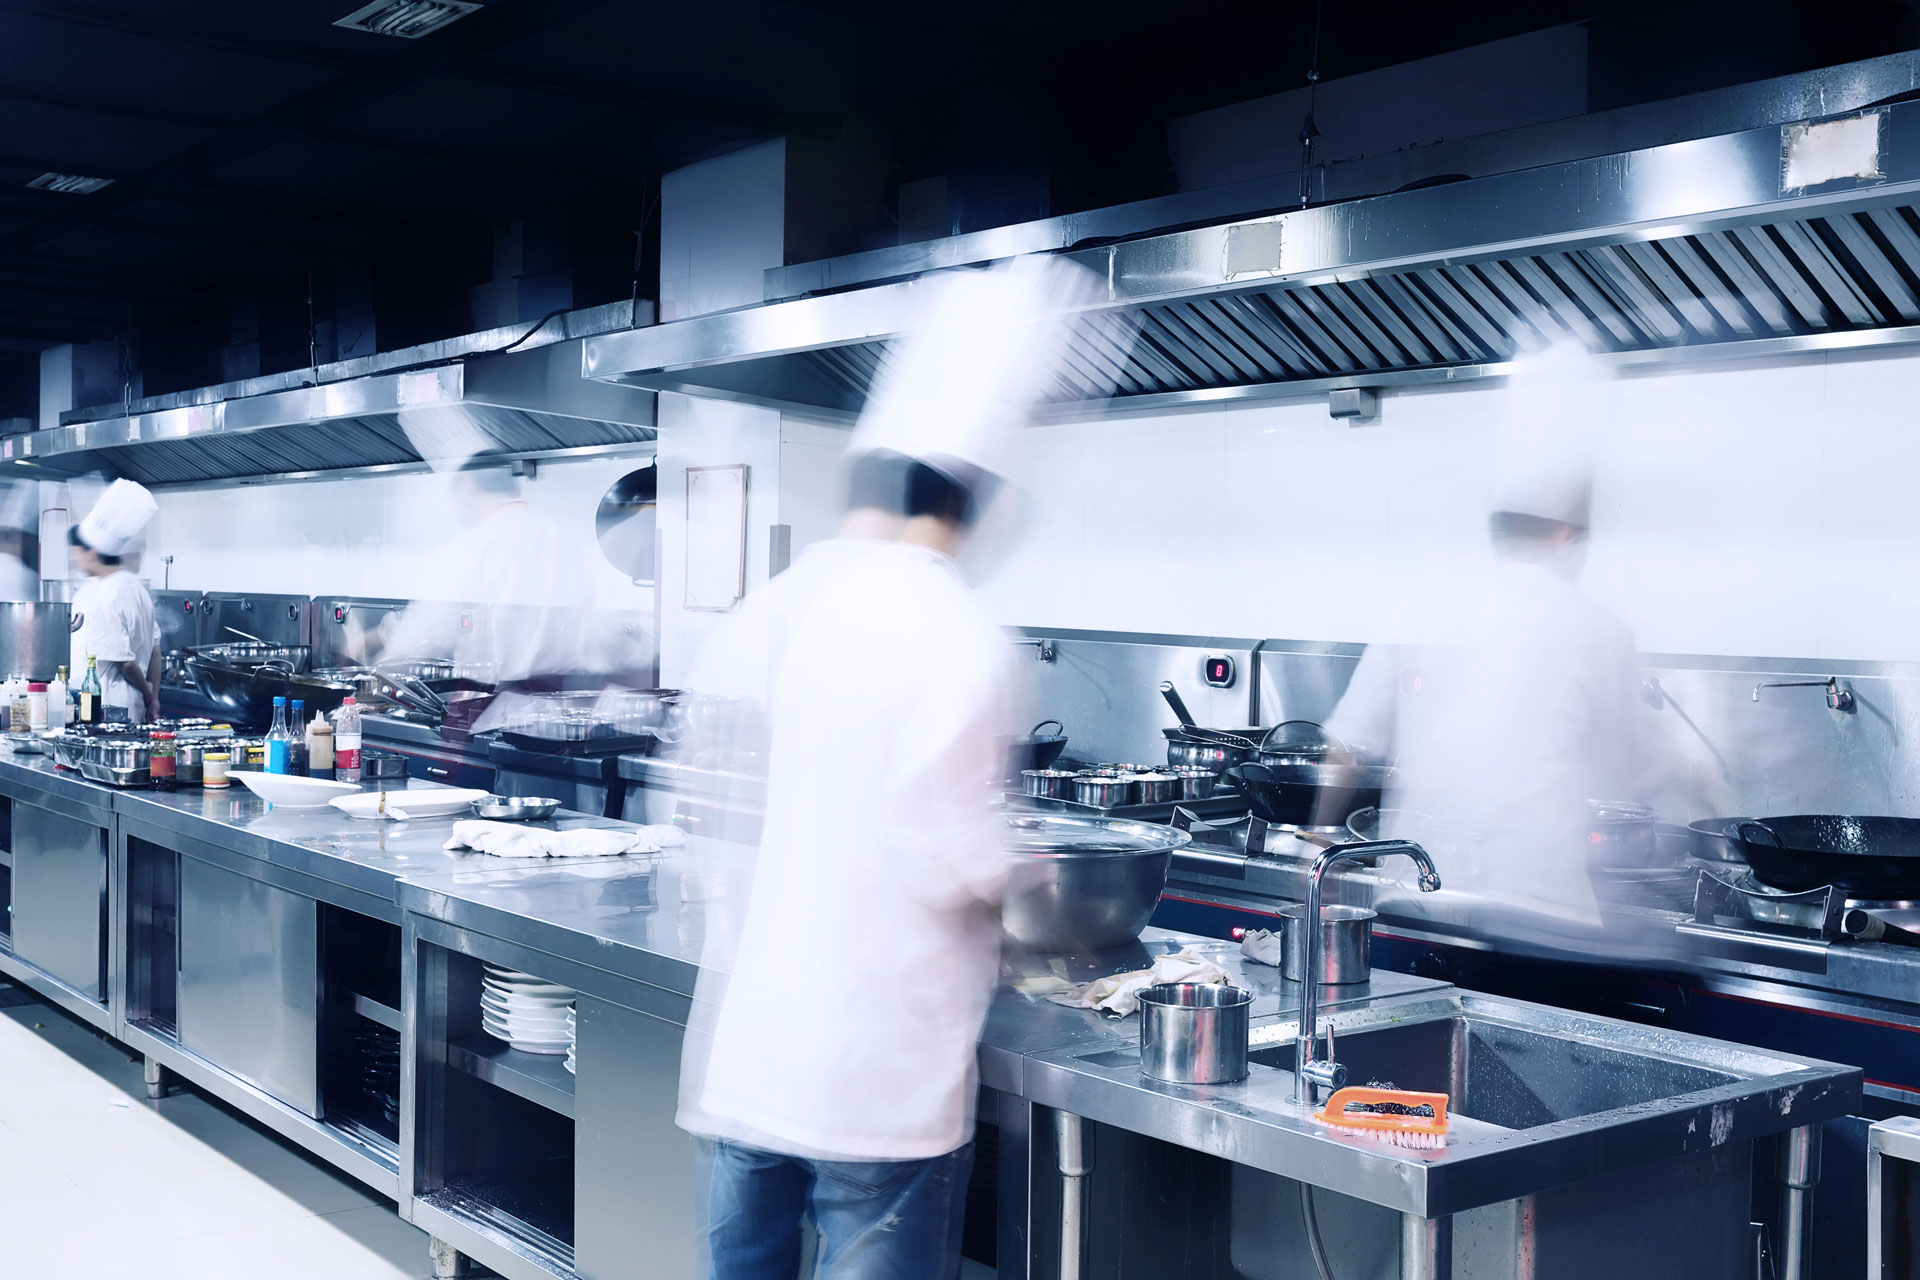 Don’t Let Faulty Kitchen Equipment Ruin Your First Restaurant